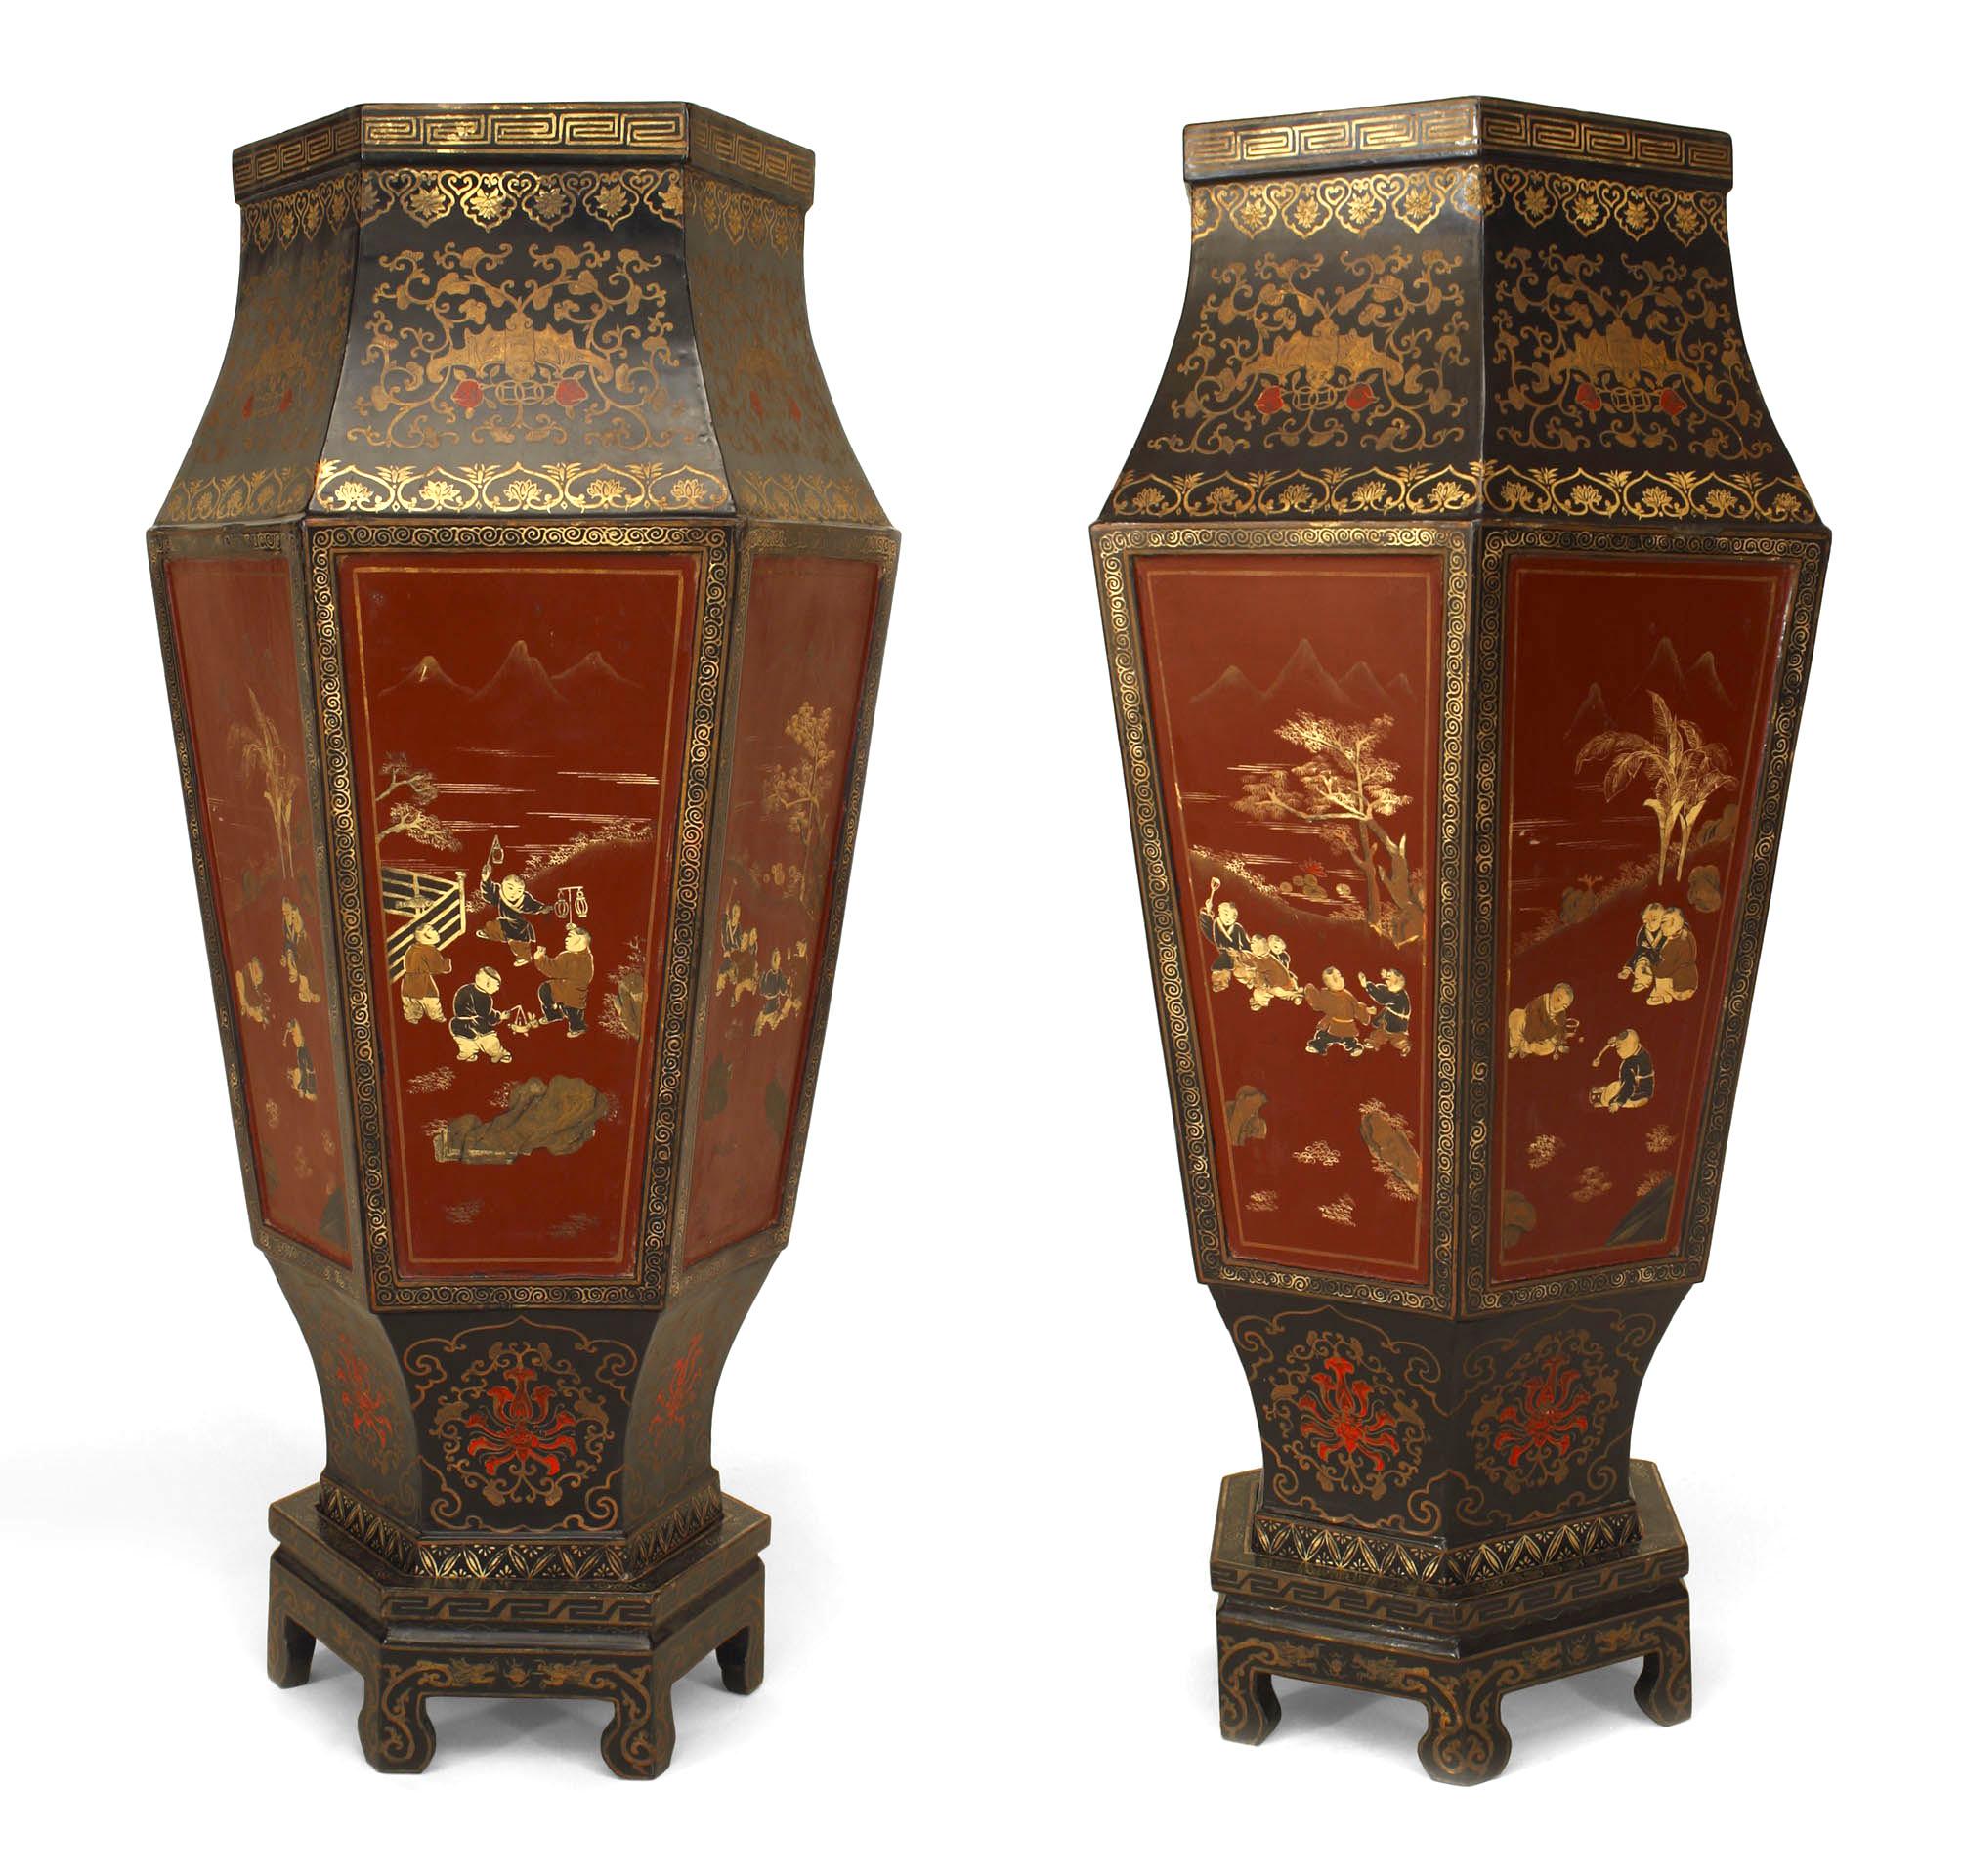 Pair of large English Regency style red and black lacquered 6 sided Chinoiserie decorated floor vases on small bases (19th Cent.) (Priced as Pair)'
 